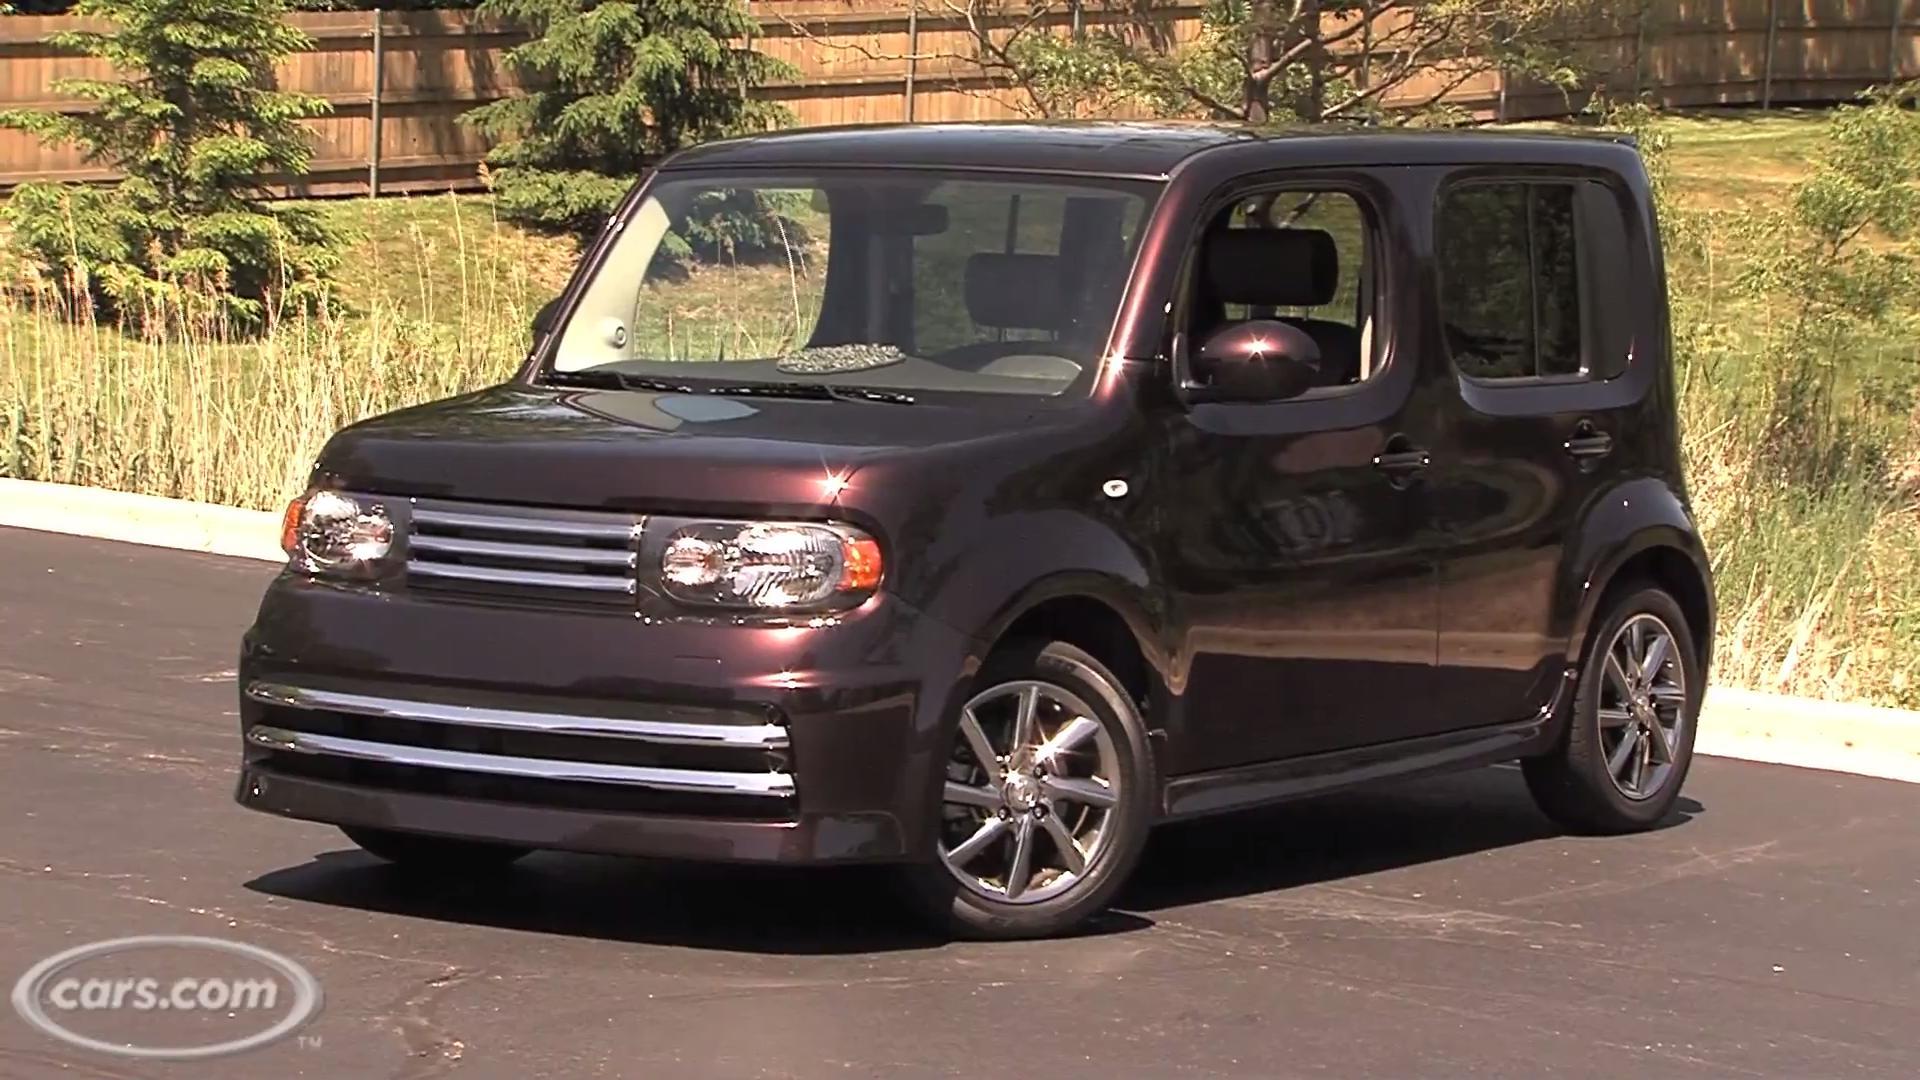 Nissan Cube Expert Reviews, Specs and Photo